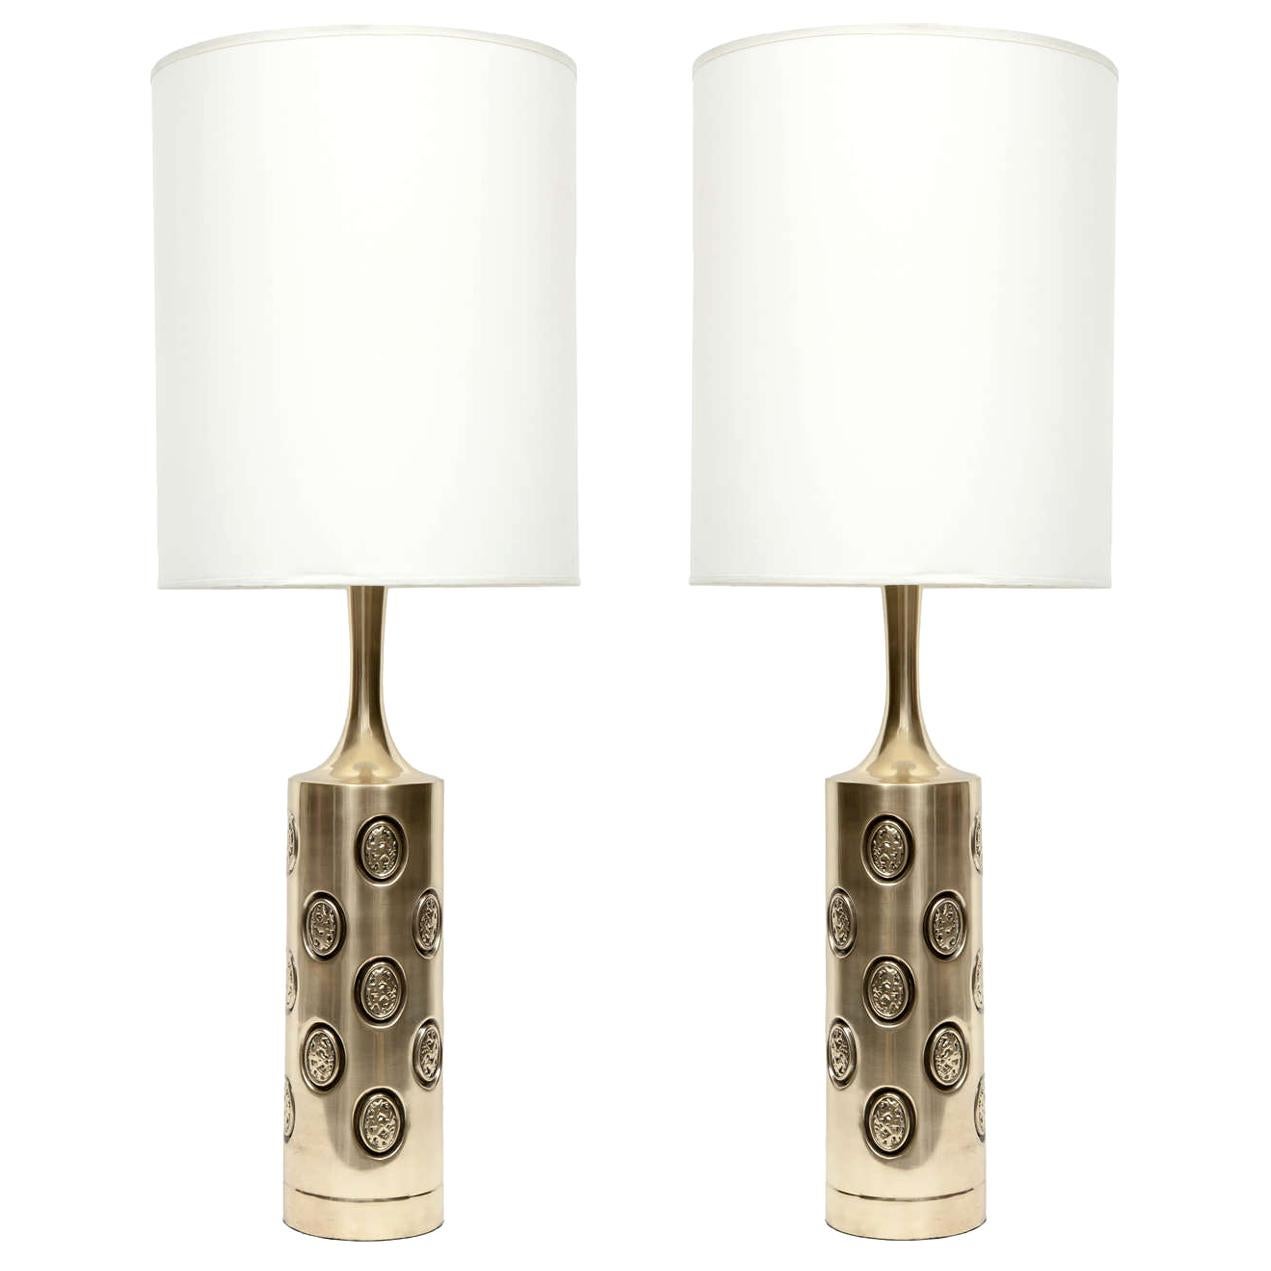 Embossed Satin Brass Lamps by Laurel